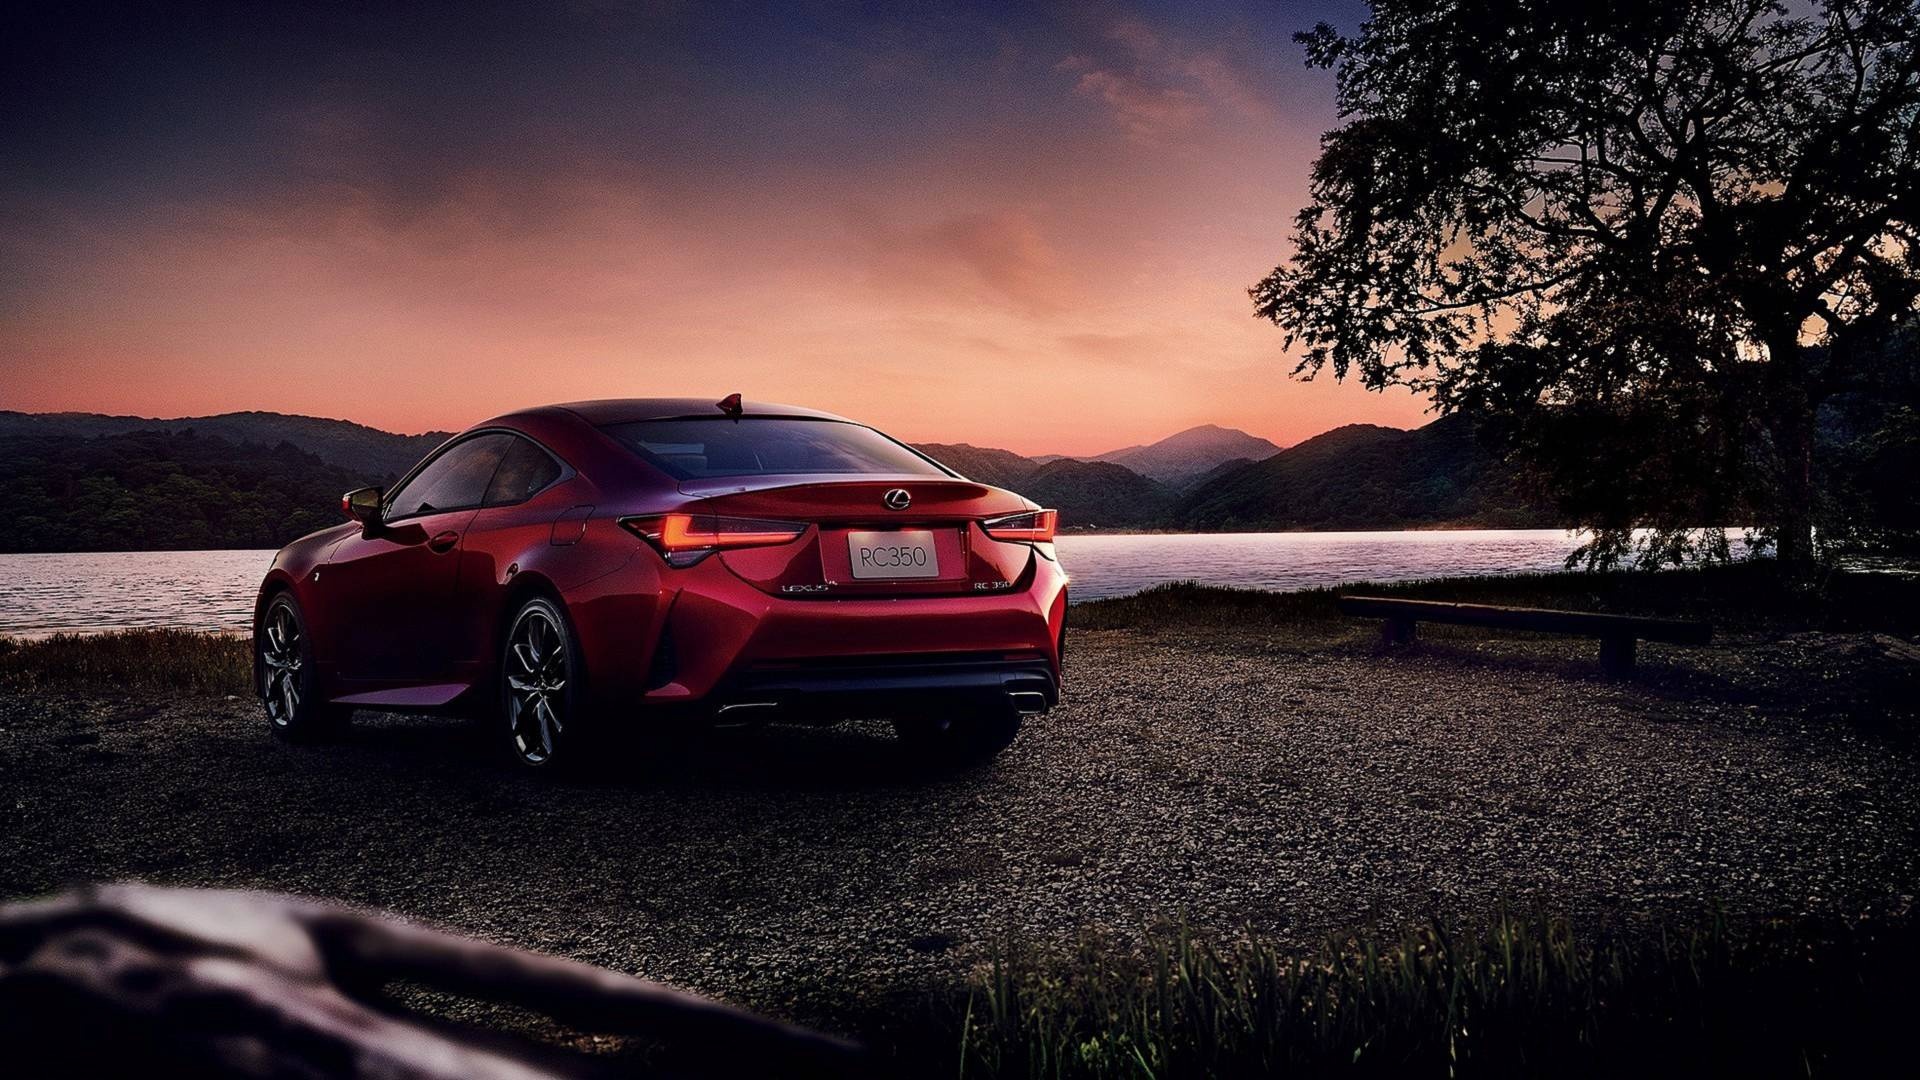 Lexus RC, Facelifted model, Enhanced features, Unmatched luxury, 1920x1080 Full HD Desktop